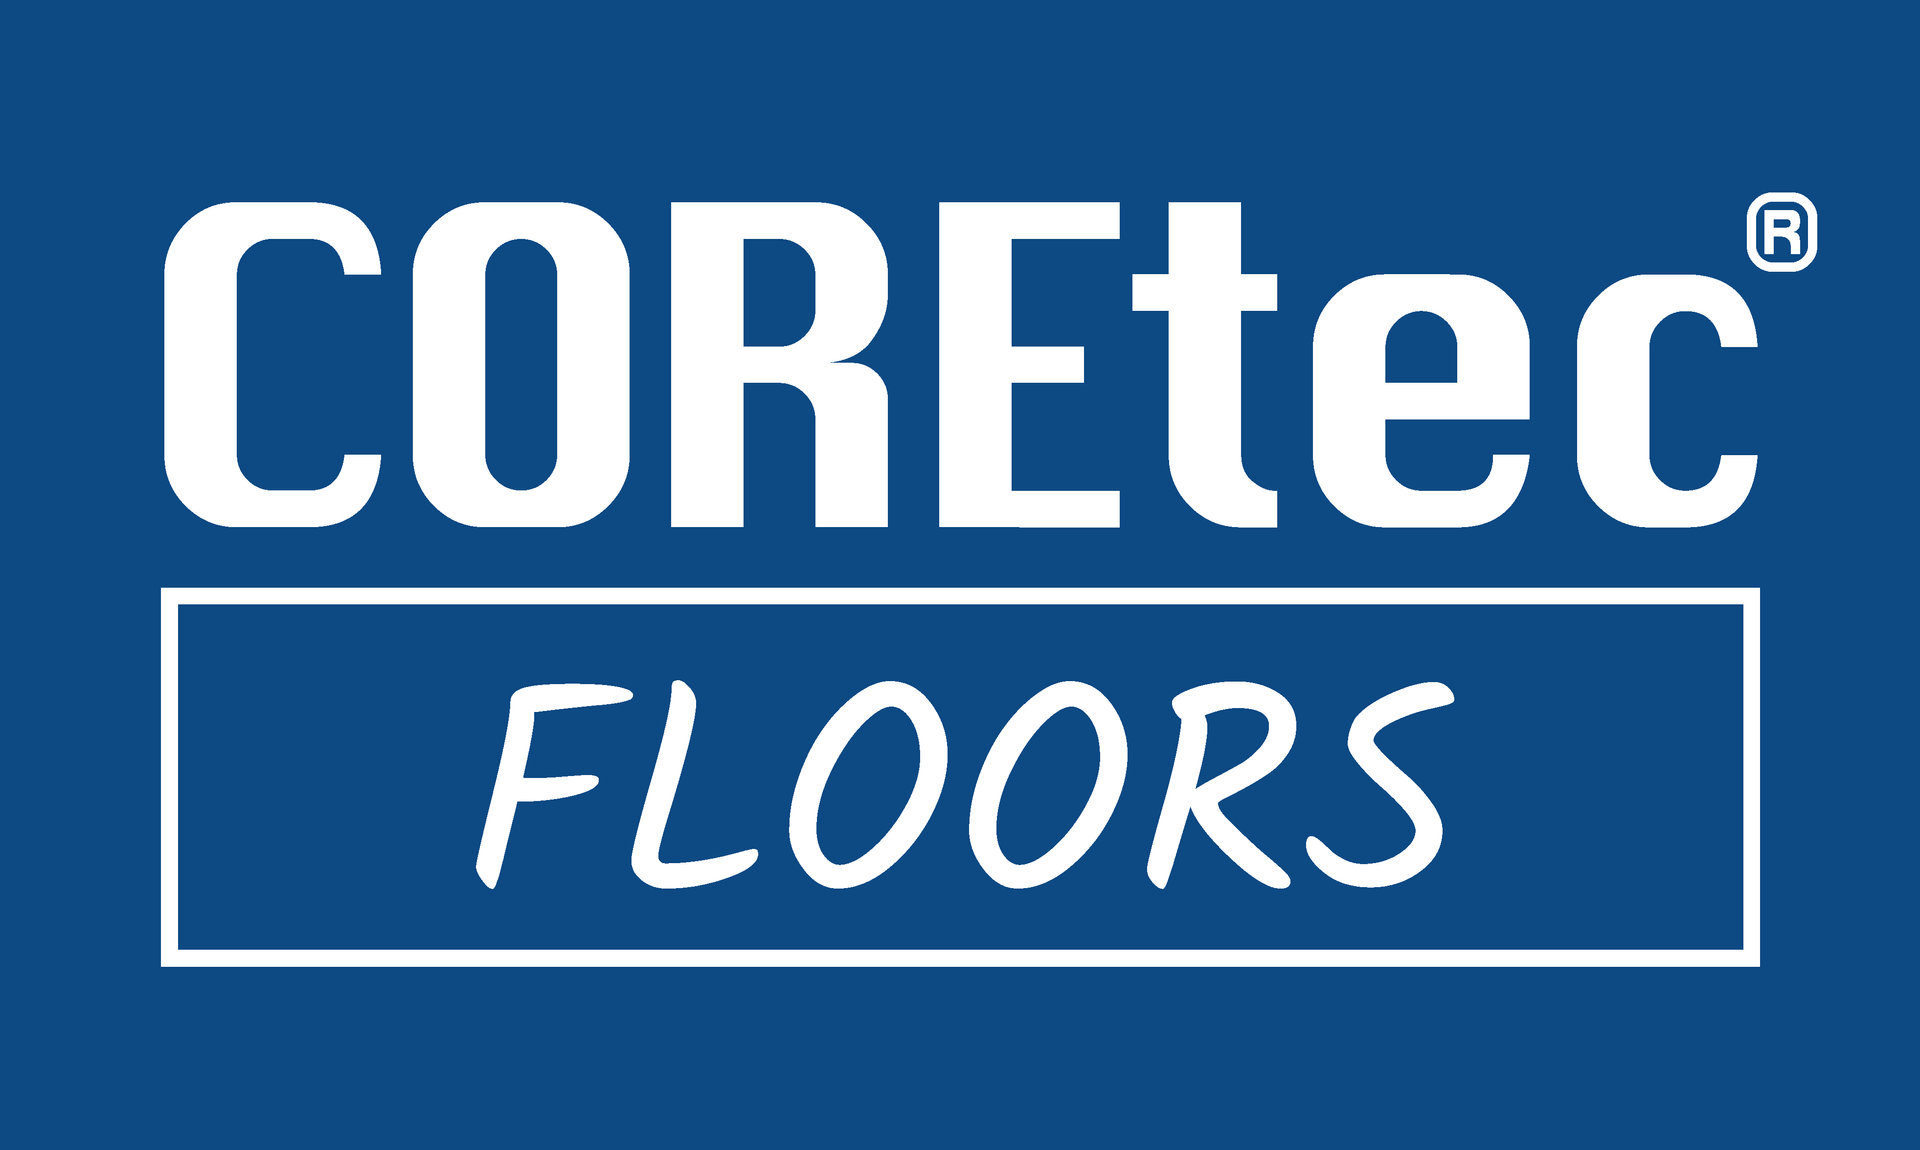 The coretec floors logo is on a blue background.